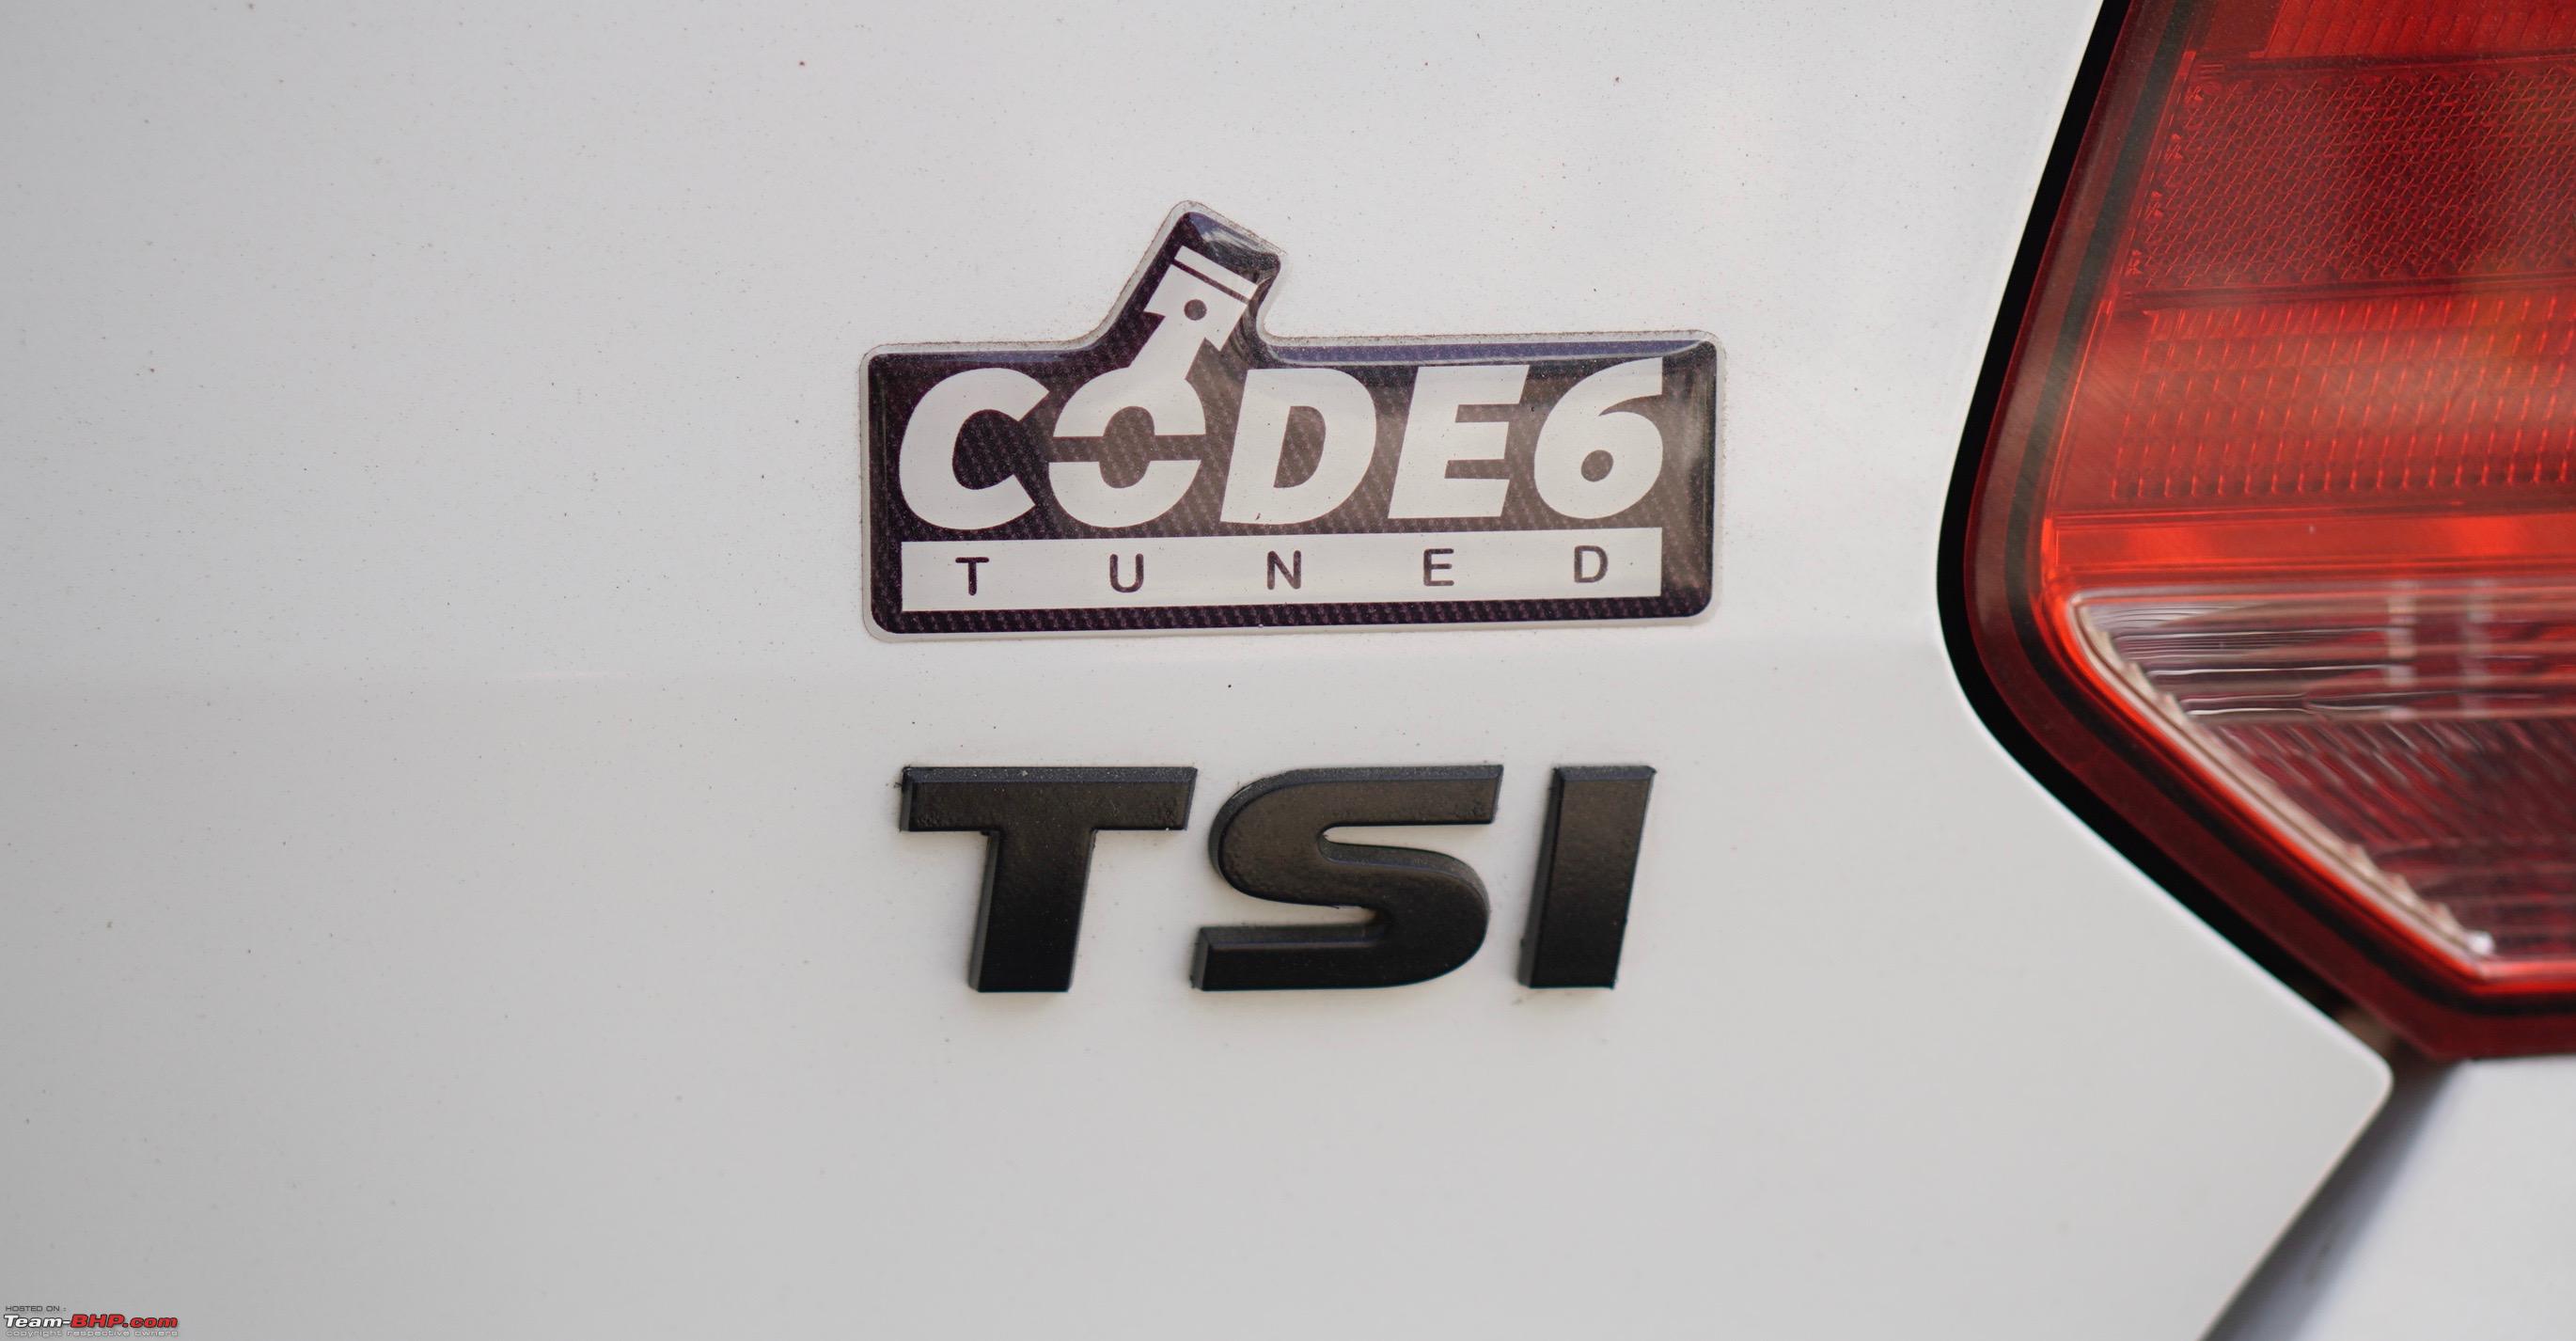 VW Polo GT TSI - Code6'd EDIT: Sold! - Page 2 - Team-BHP